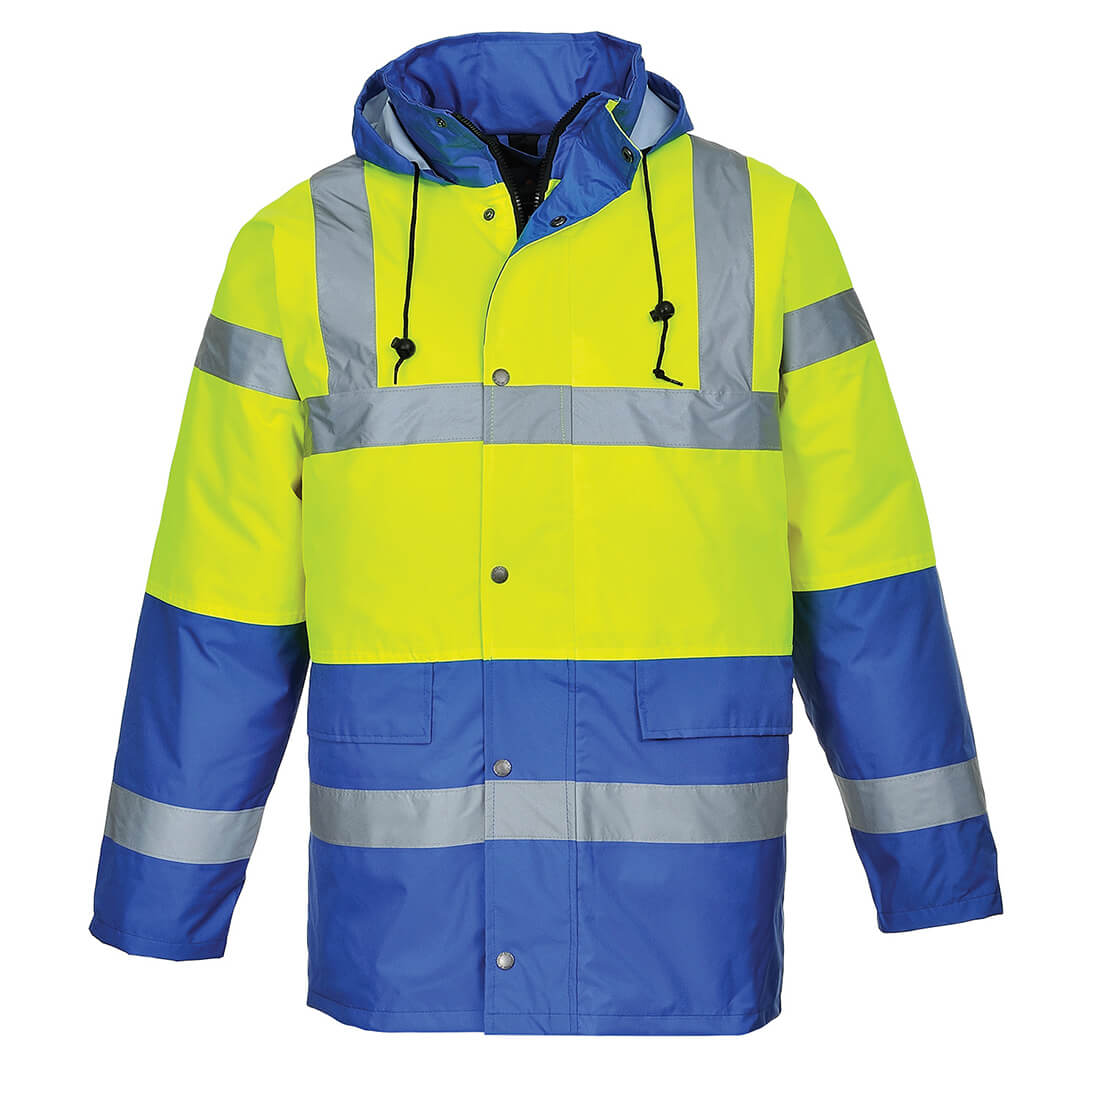 Image of Oxford Weave 300D Class 3 Hi Vis Contrast Traffic Jacket Yellow / Royal Blue 4XL